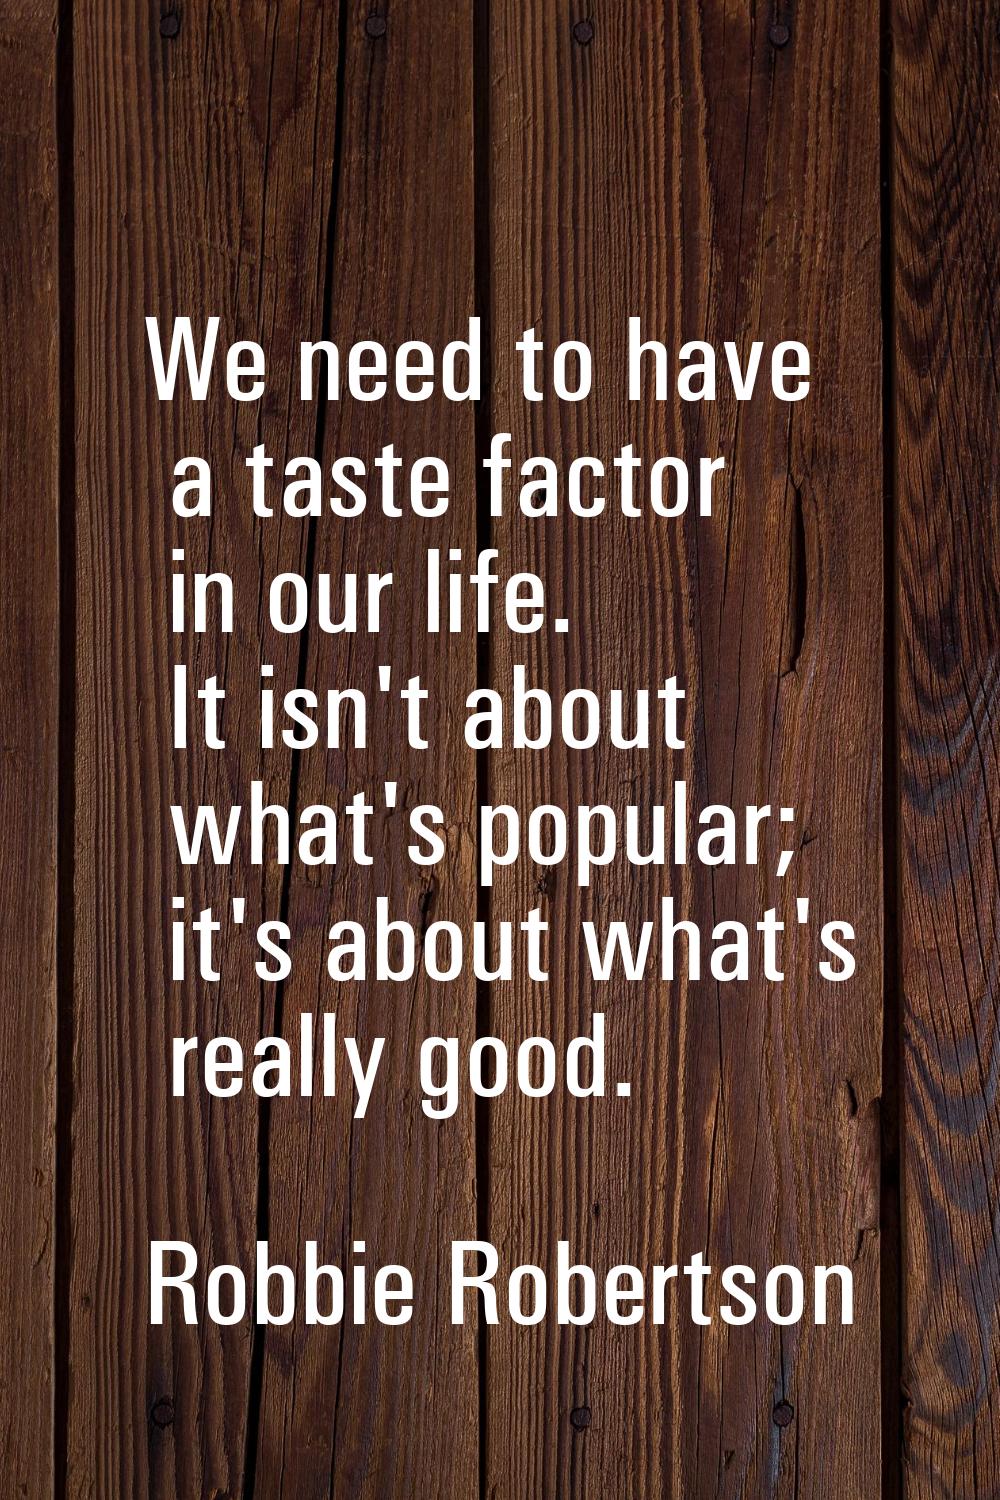 We need to have a taste factor in our life. It isn't about what's popular; it's about what's really